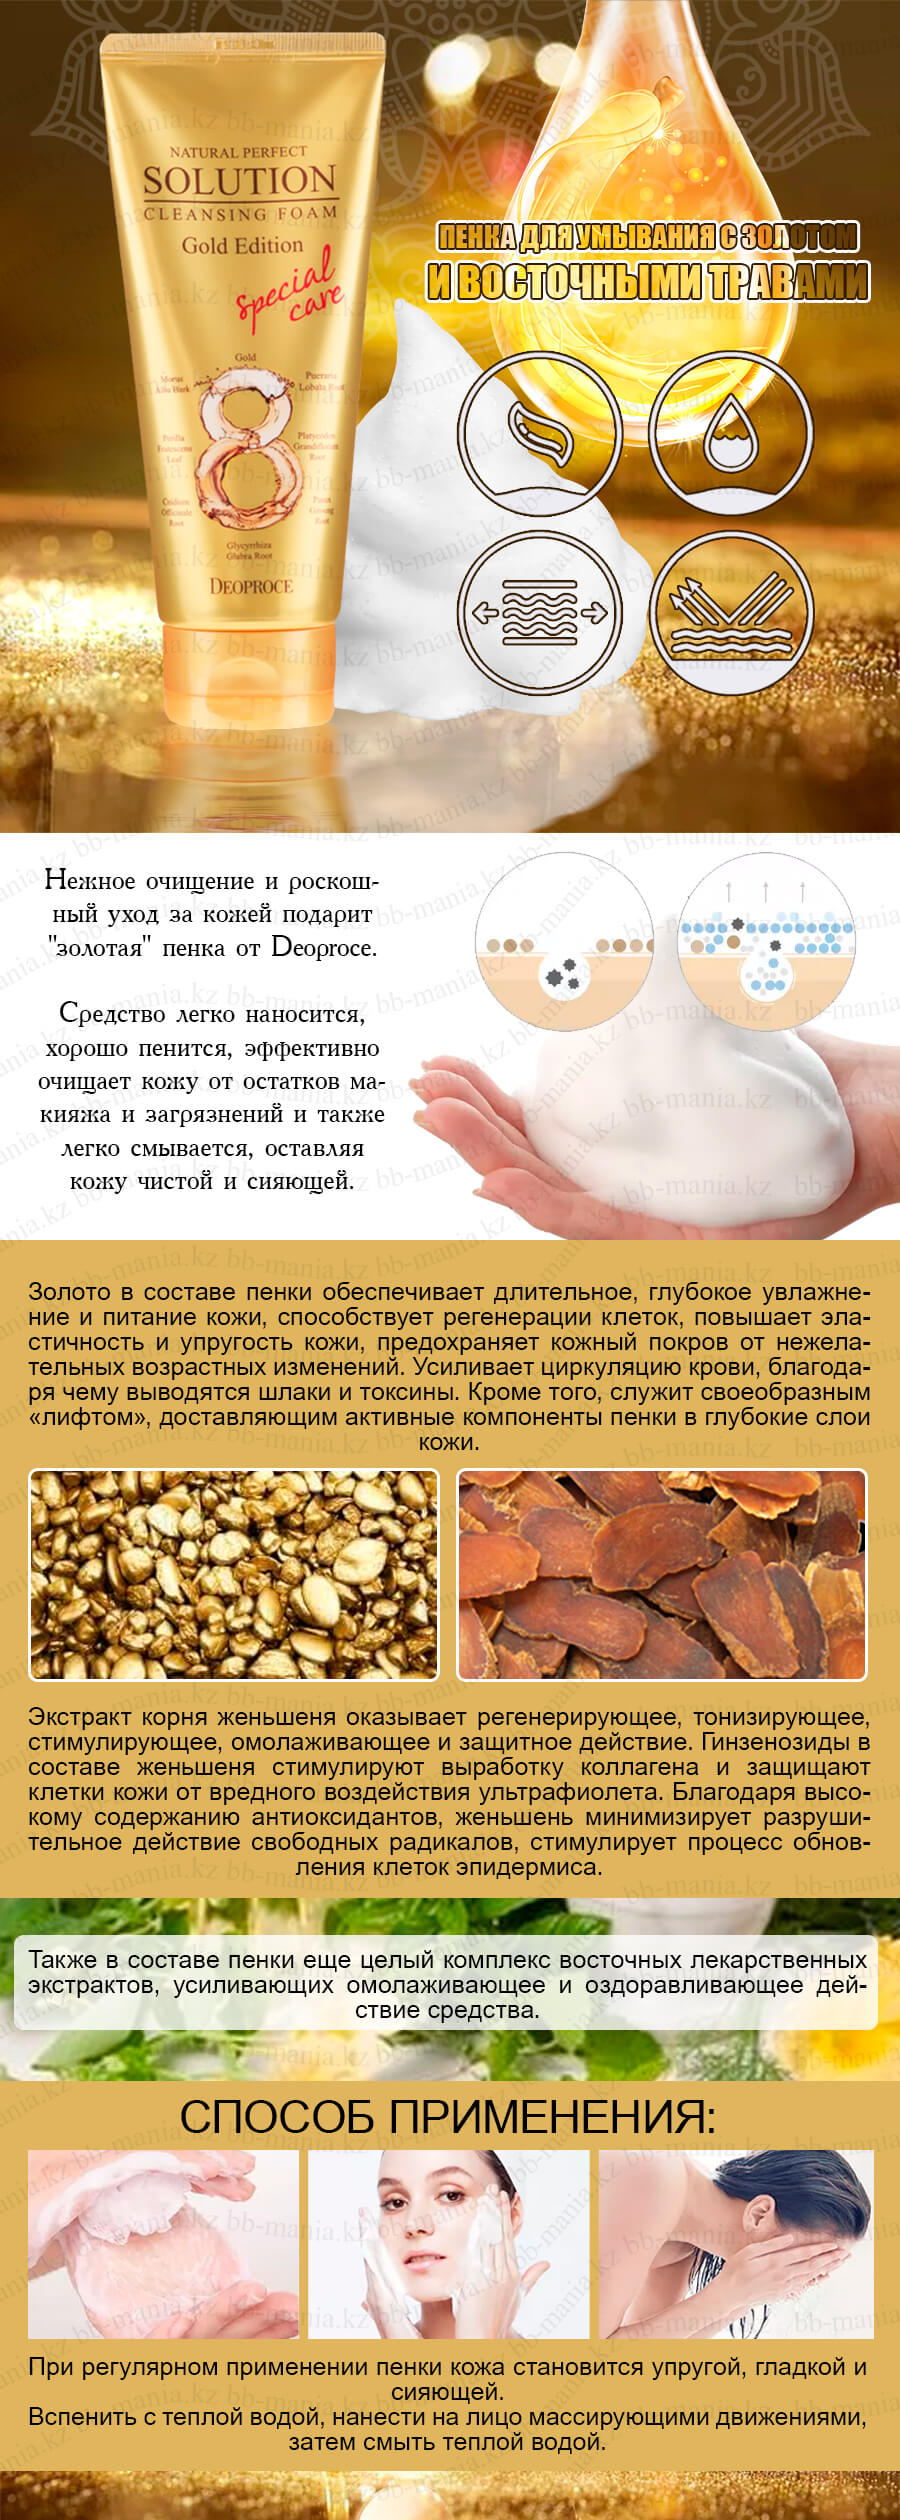 Natural-Perfect-Solution-Cleansing-Foam-Gold-[DEOPROCE]